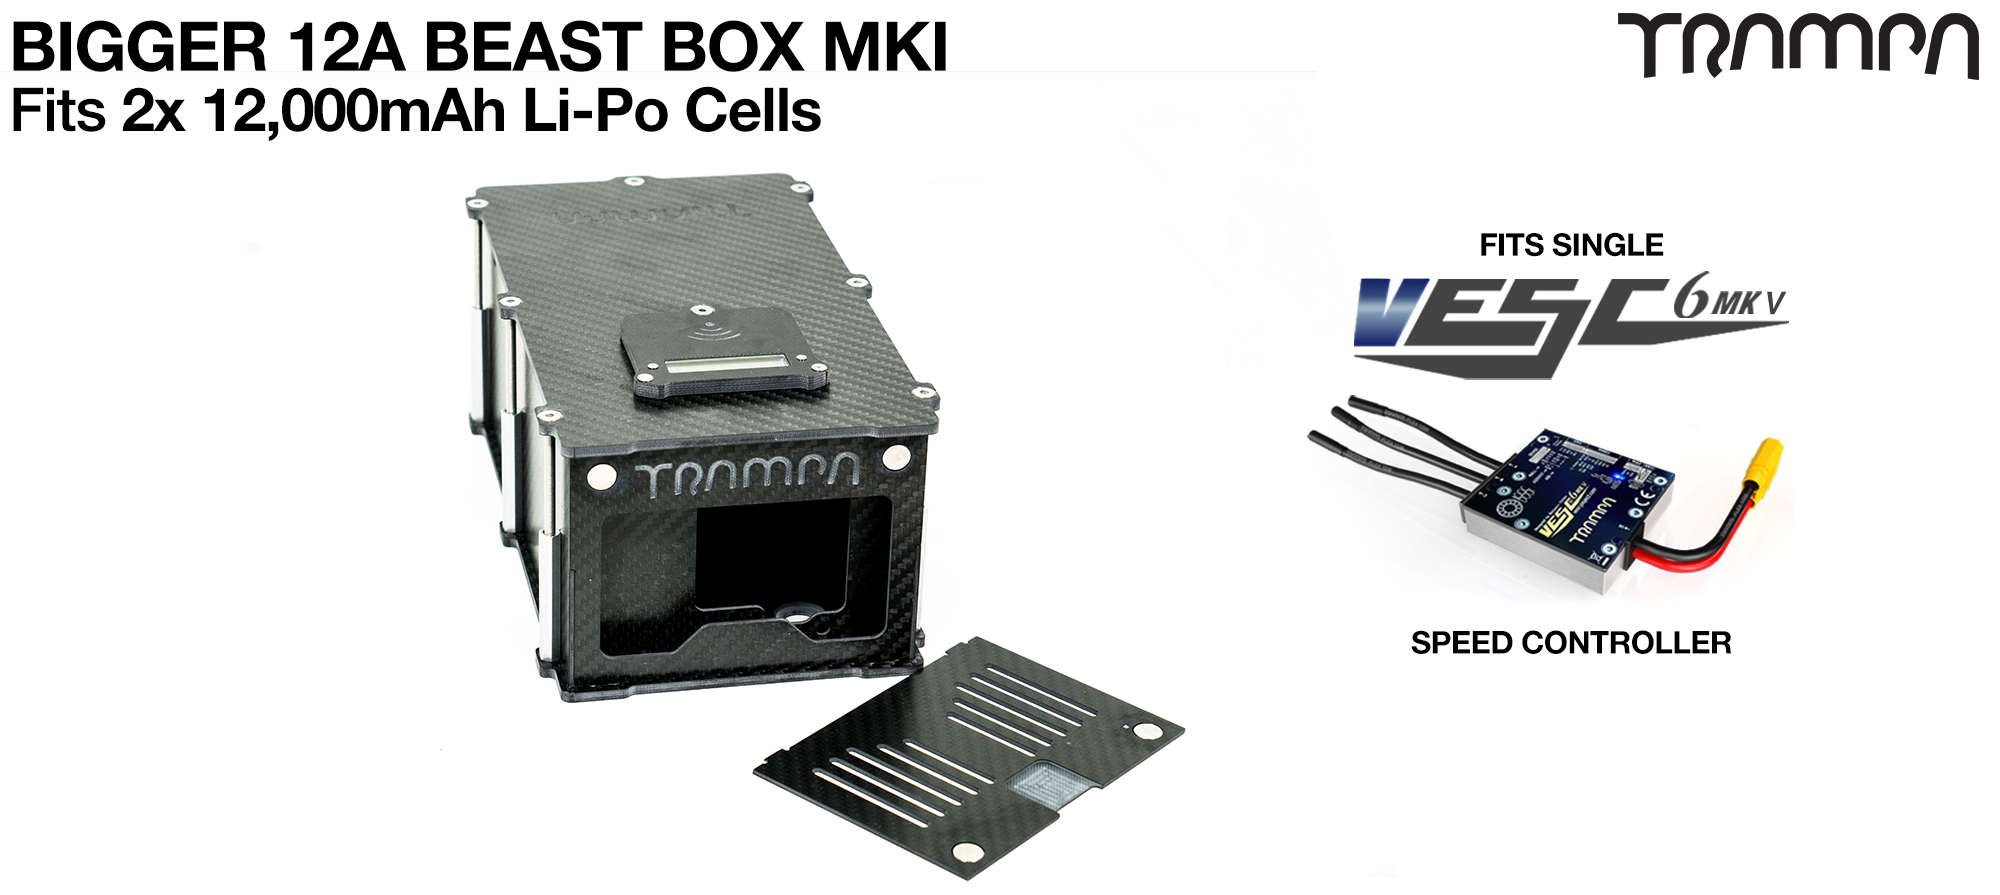 MkI 12A BIGGER BEAST Box with Internal Housing for 1x VESC 6 & 2x 6s 12A cells 